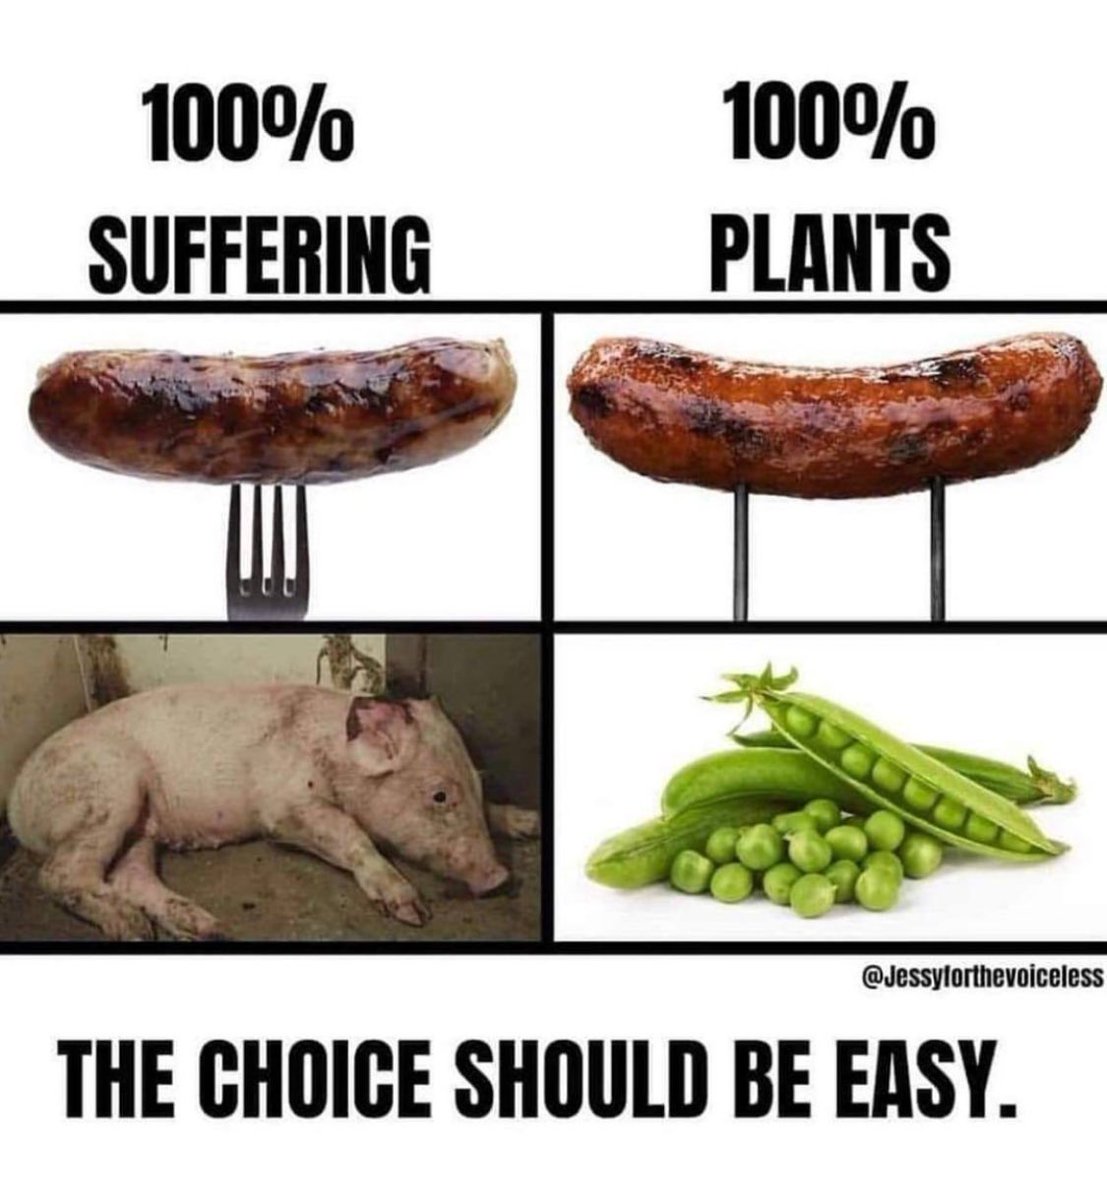 The choice IS easy when you value the lives of other sentient beings.

Being anti oppression shouldn’t be controversial. #AnimalRights #Vegan